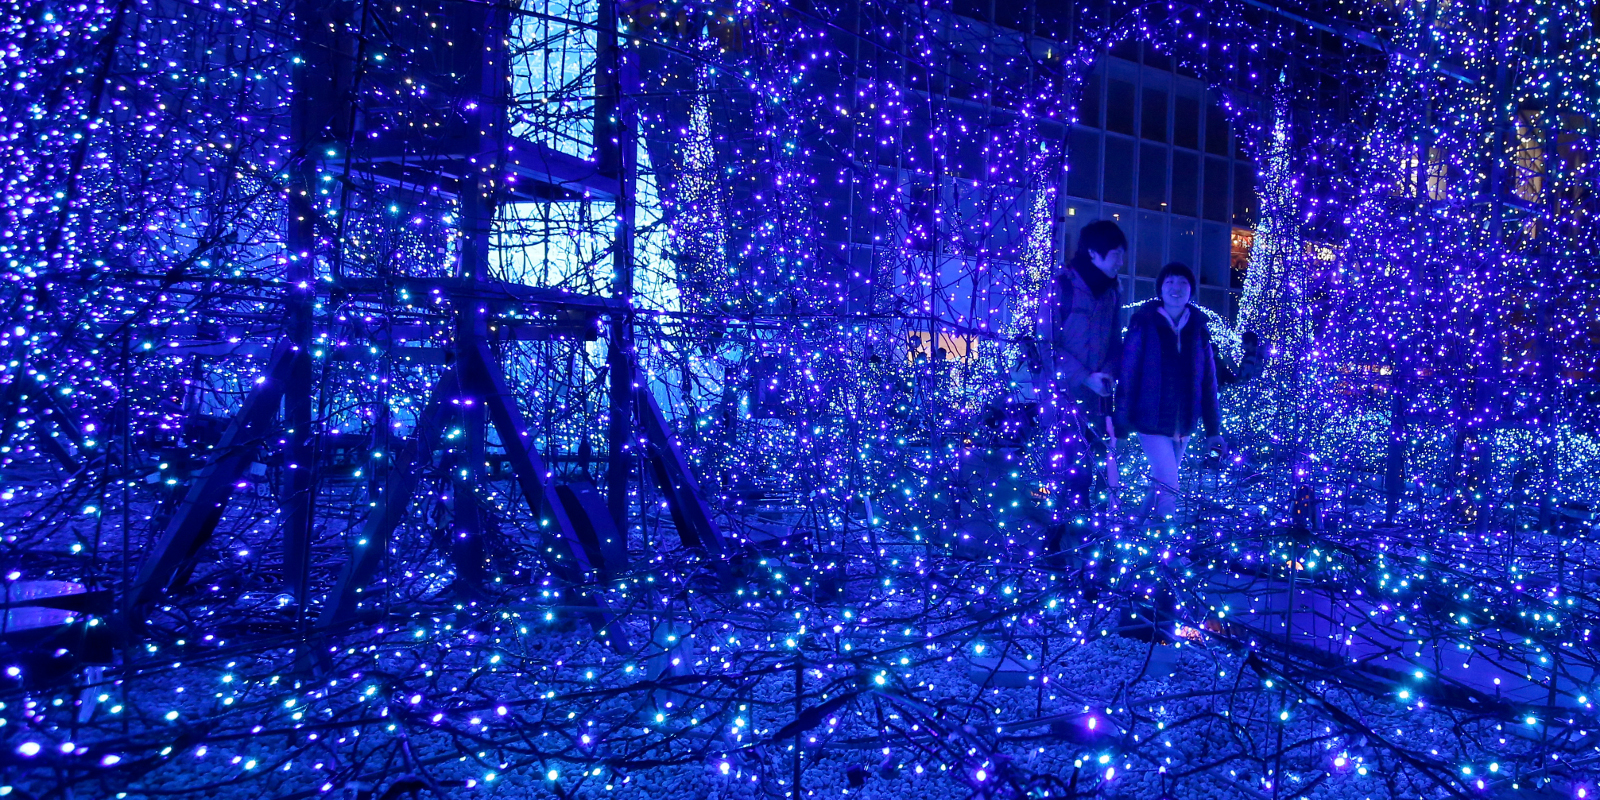 This Light Show In Tokyo Is Bewilderingly Pretty